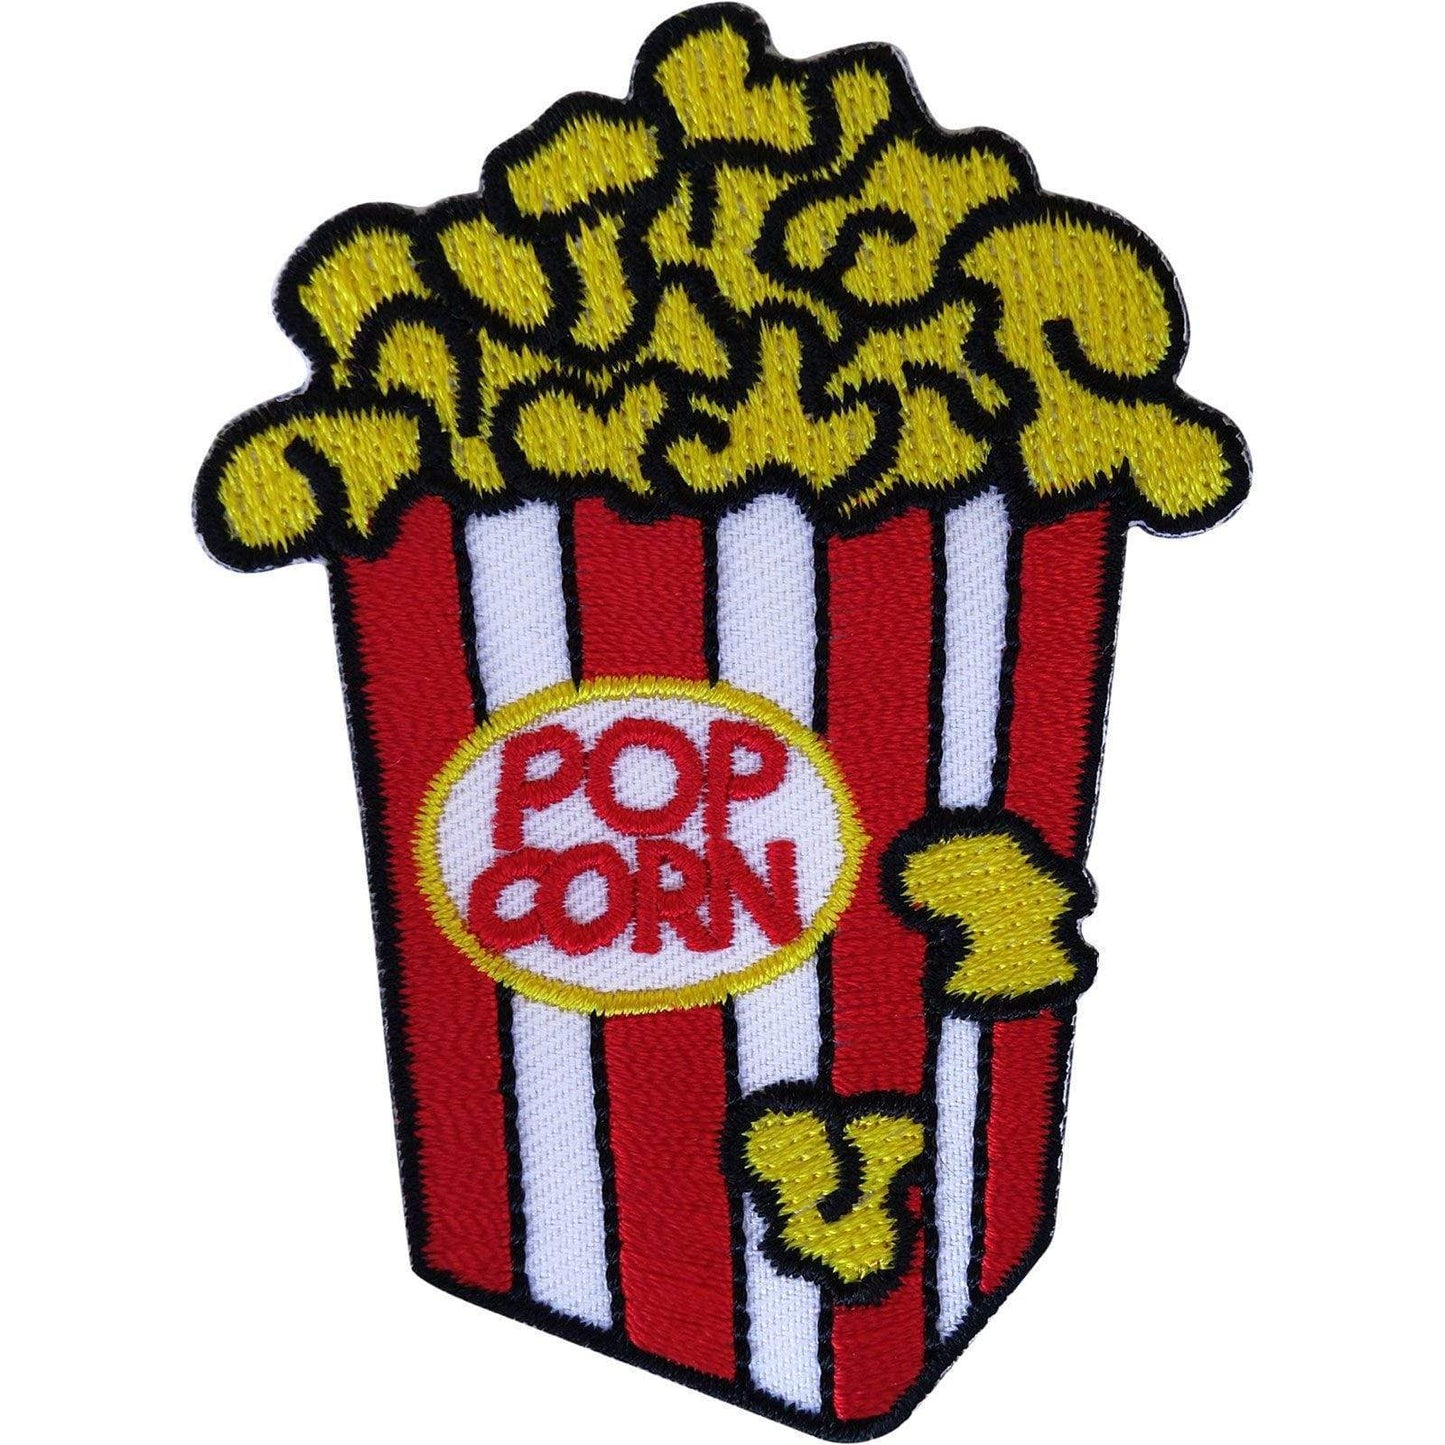 Popcorn Patch Iron On Sew On Clothes Bags Embroidered Badge Embroidery Applique